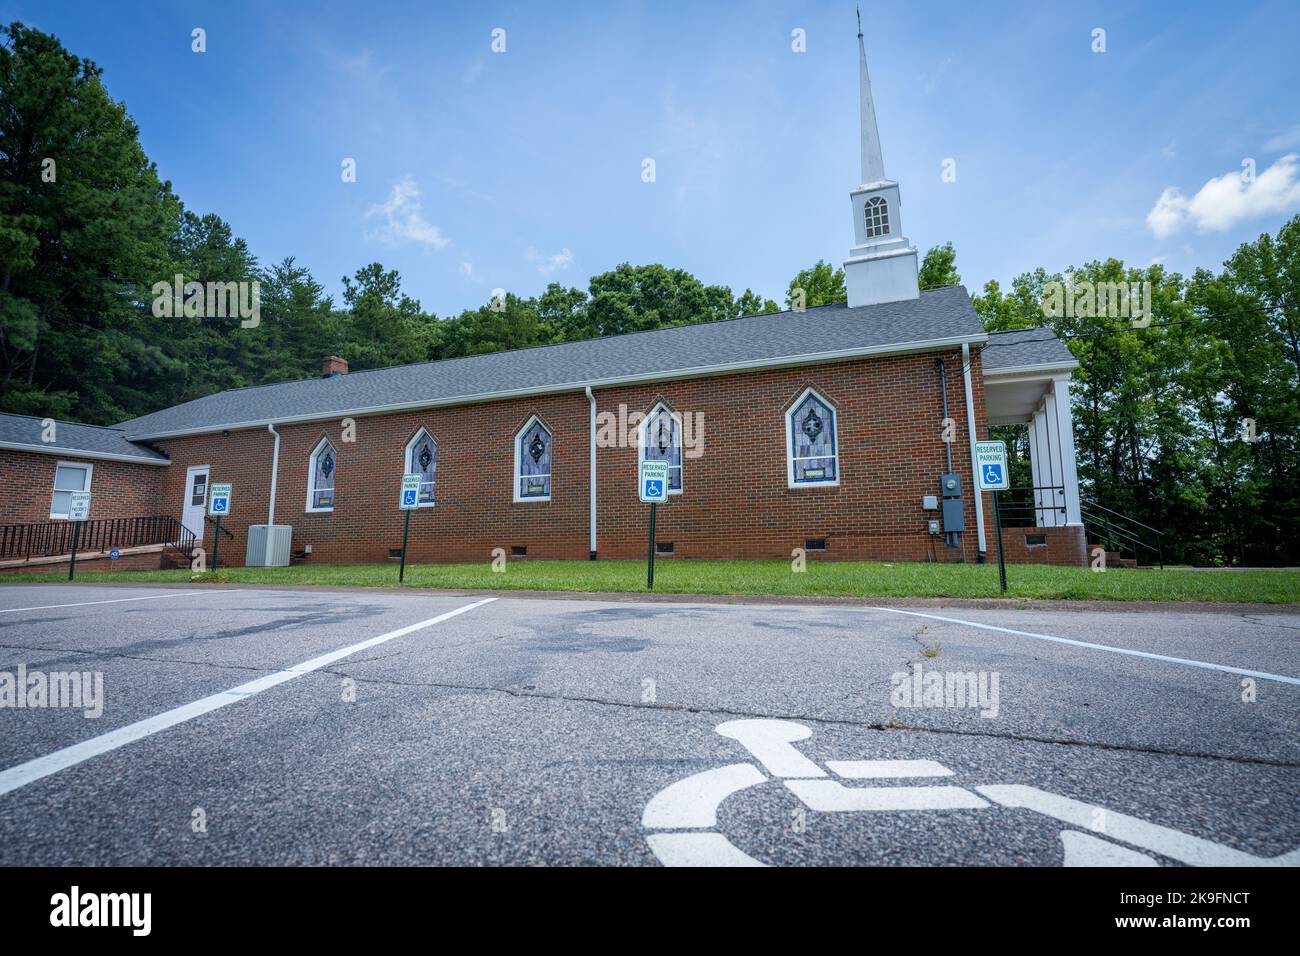 Disabled parking spaces at an American church with a white tower Stock Photo